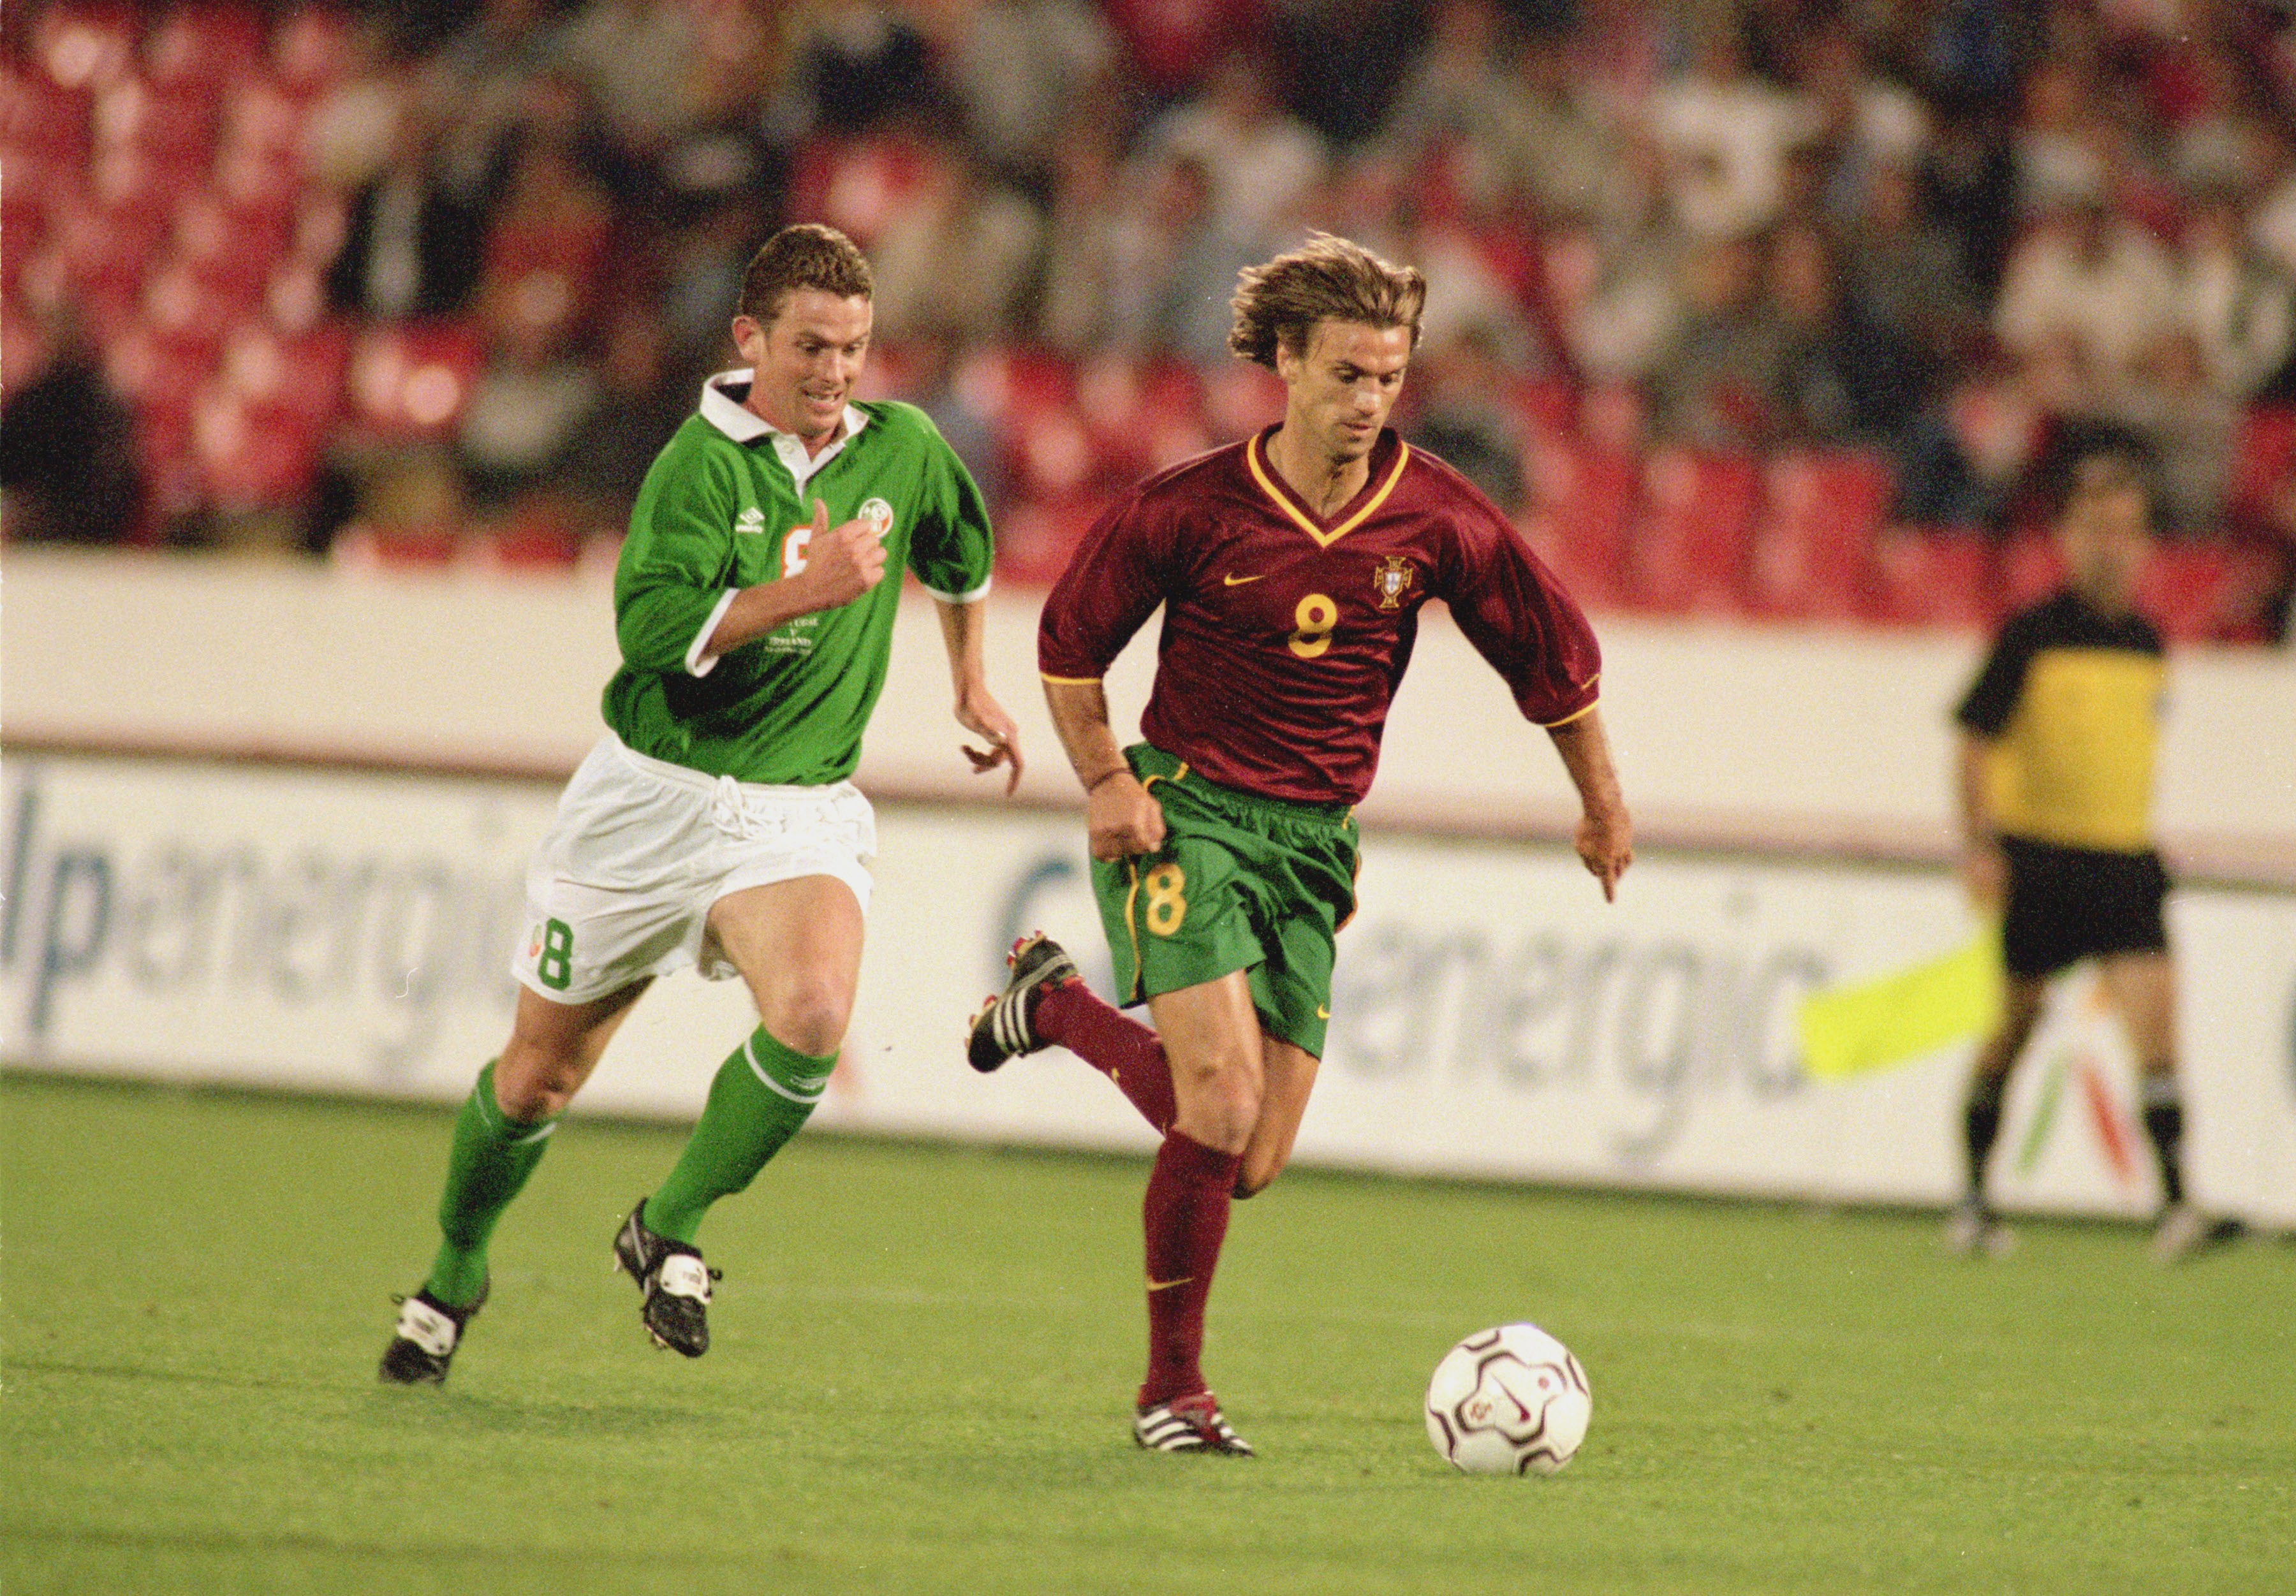 7 Oct 2000:  Joao Pinto of Portugal breezes past Mark Kinsella of Republic of Ireland during the World Cup 2002 Group 2 Qualifying match played at the Stadium of Light, in Lisbon, Portugal. The match ended in a 1-1 draw. \ Photo taken by Nuno Correia \ Ma